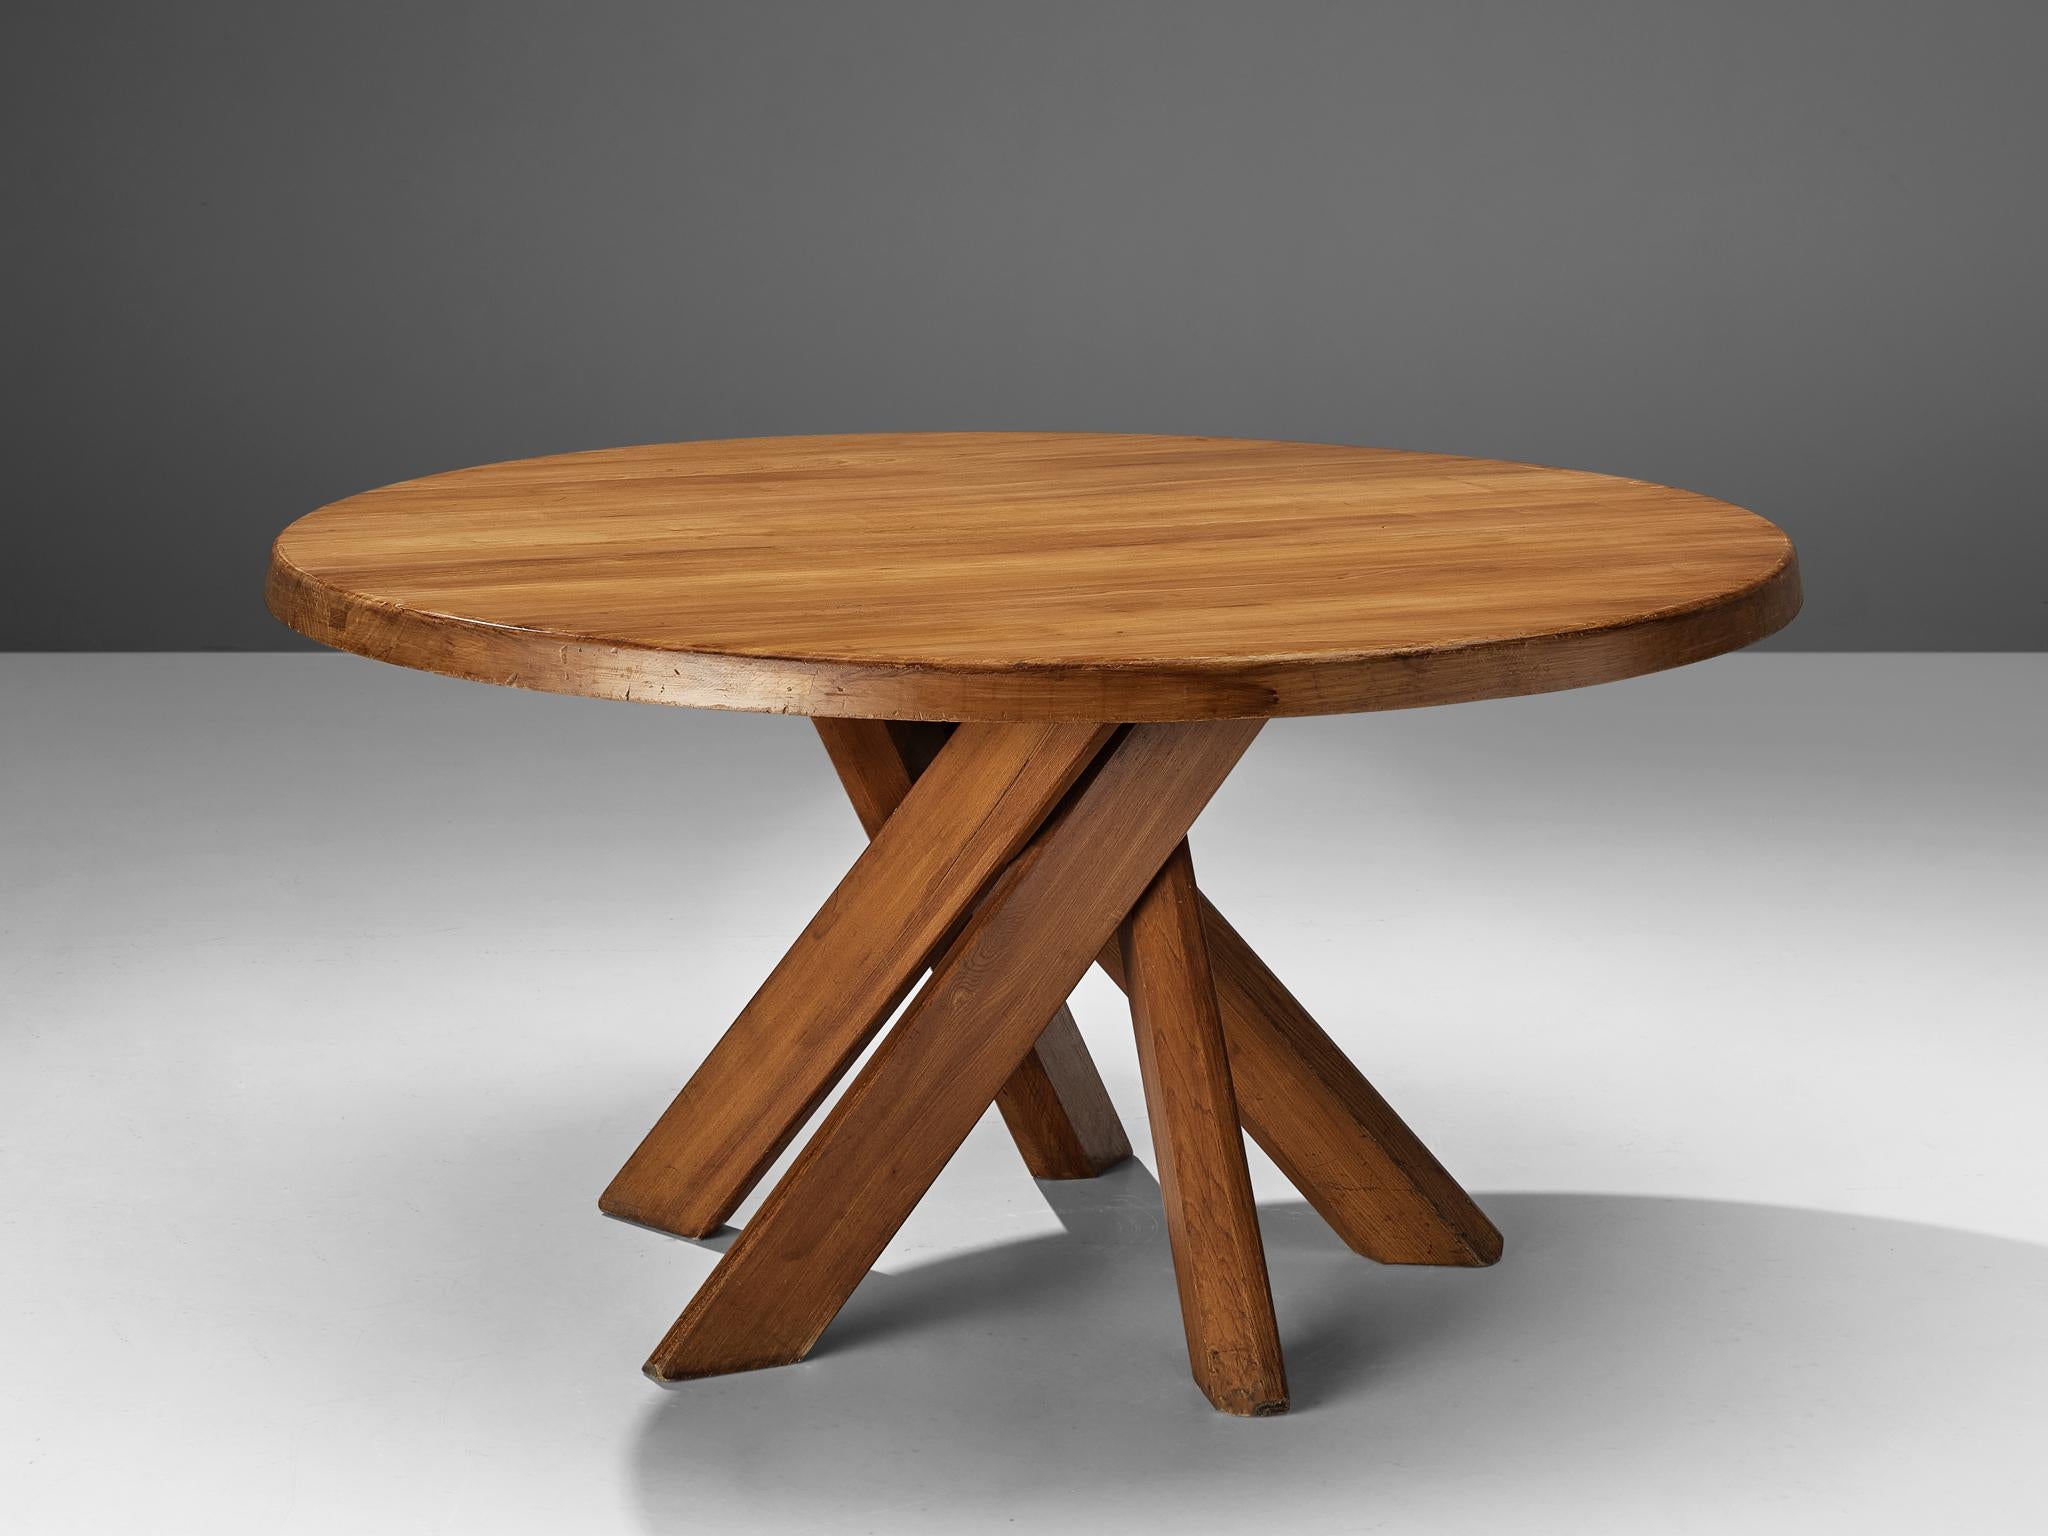 Pierre Chapo, dining table model 'T21D', elm, France, 1960s

This round dining table is designed by Pierre Chapo. The shape of the base creates a very dynamic look. The perfectly made solid wood joints, also shown on the side of the top with